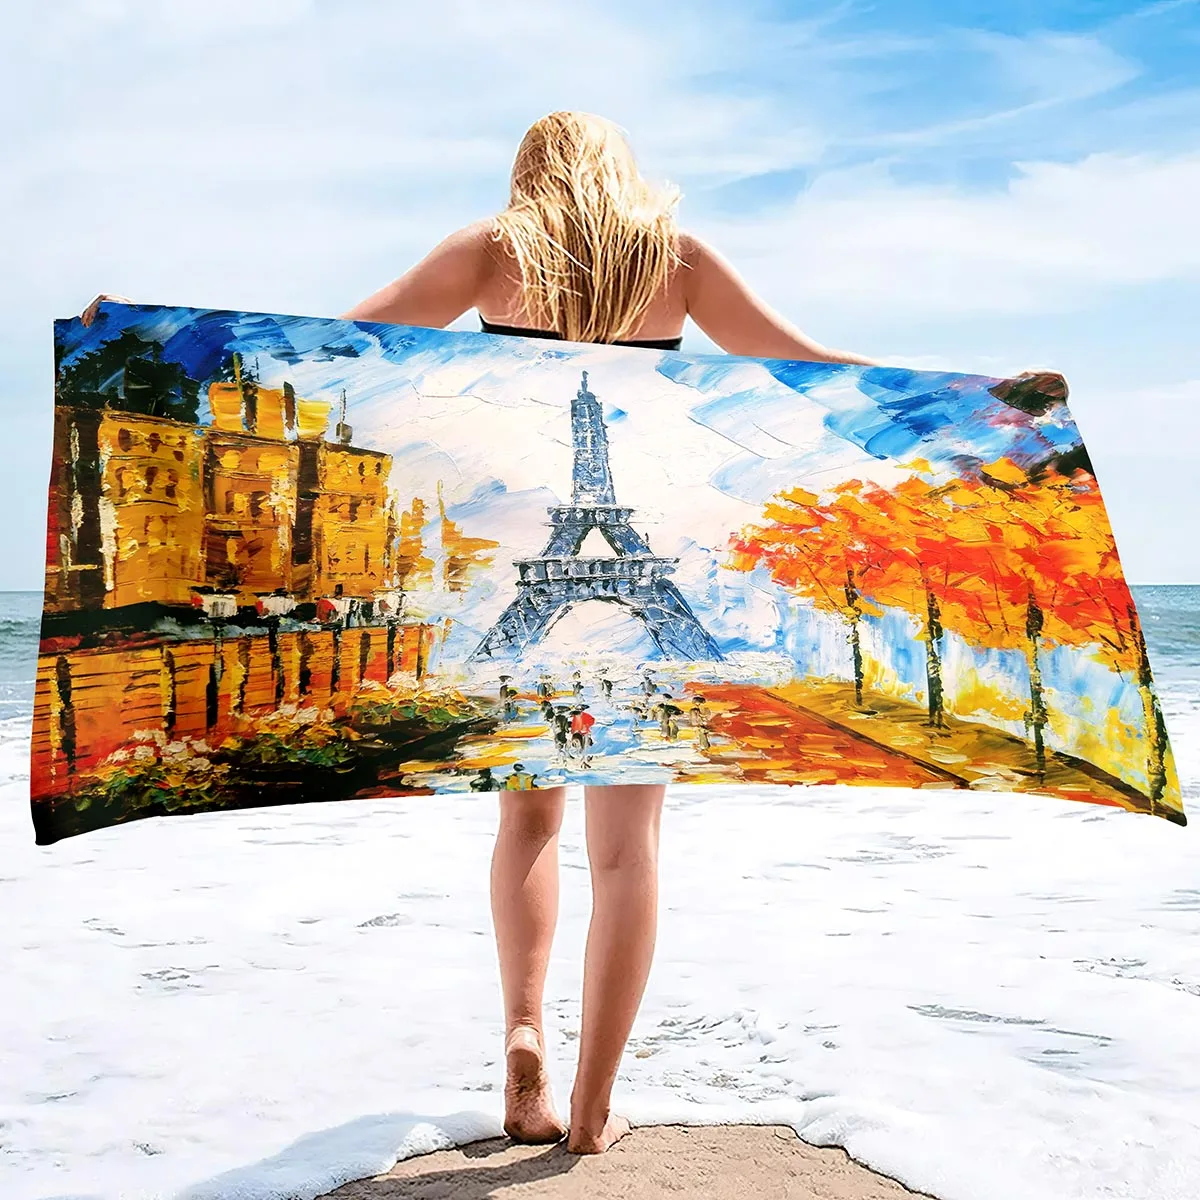 

Oil Painting France Paris Eiffel Tower Beach Towel Highly Absorbent,Quick Dry,Oversized Large Beach Towels,Sand Free,Bath Towel